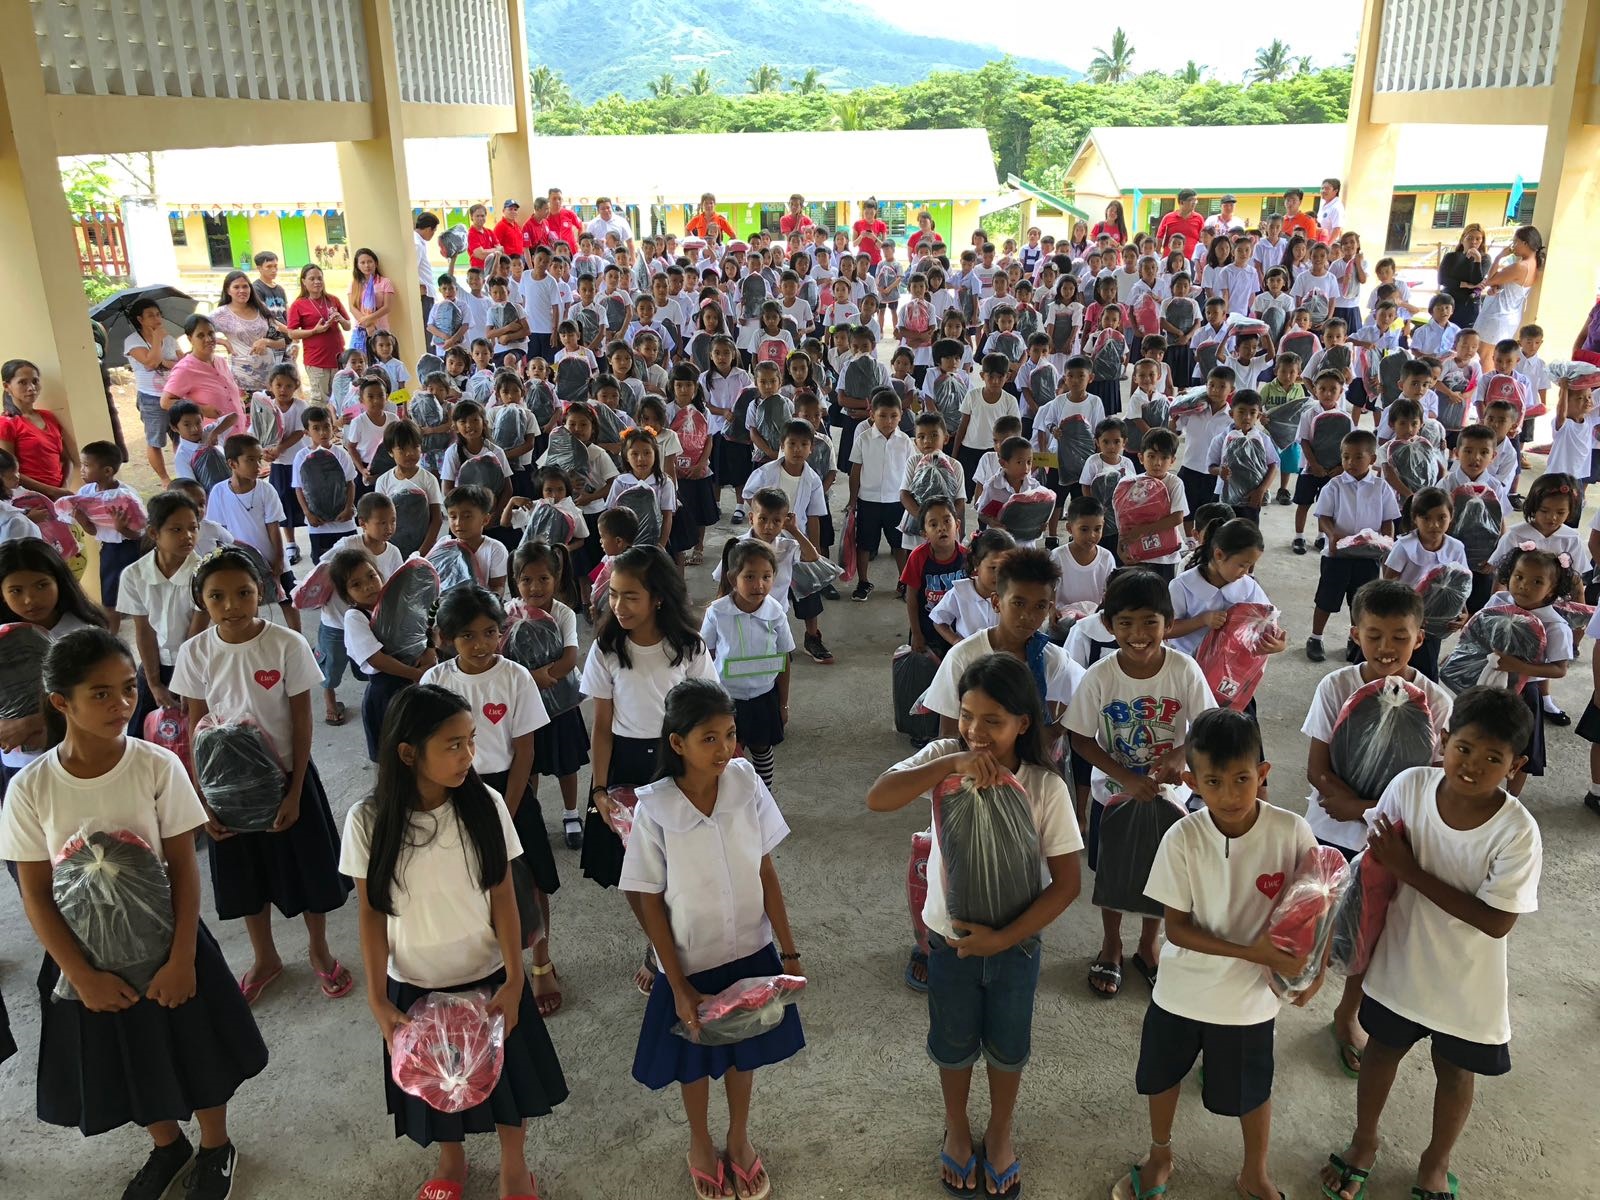 Kuwait Red Crescent Society (KRCS) distributed 1,000 school bags, stationery and food coupons to students of three schools in Mayon village, Albay province, to the east of the Philippines.